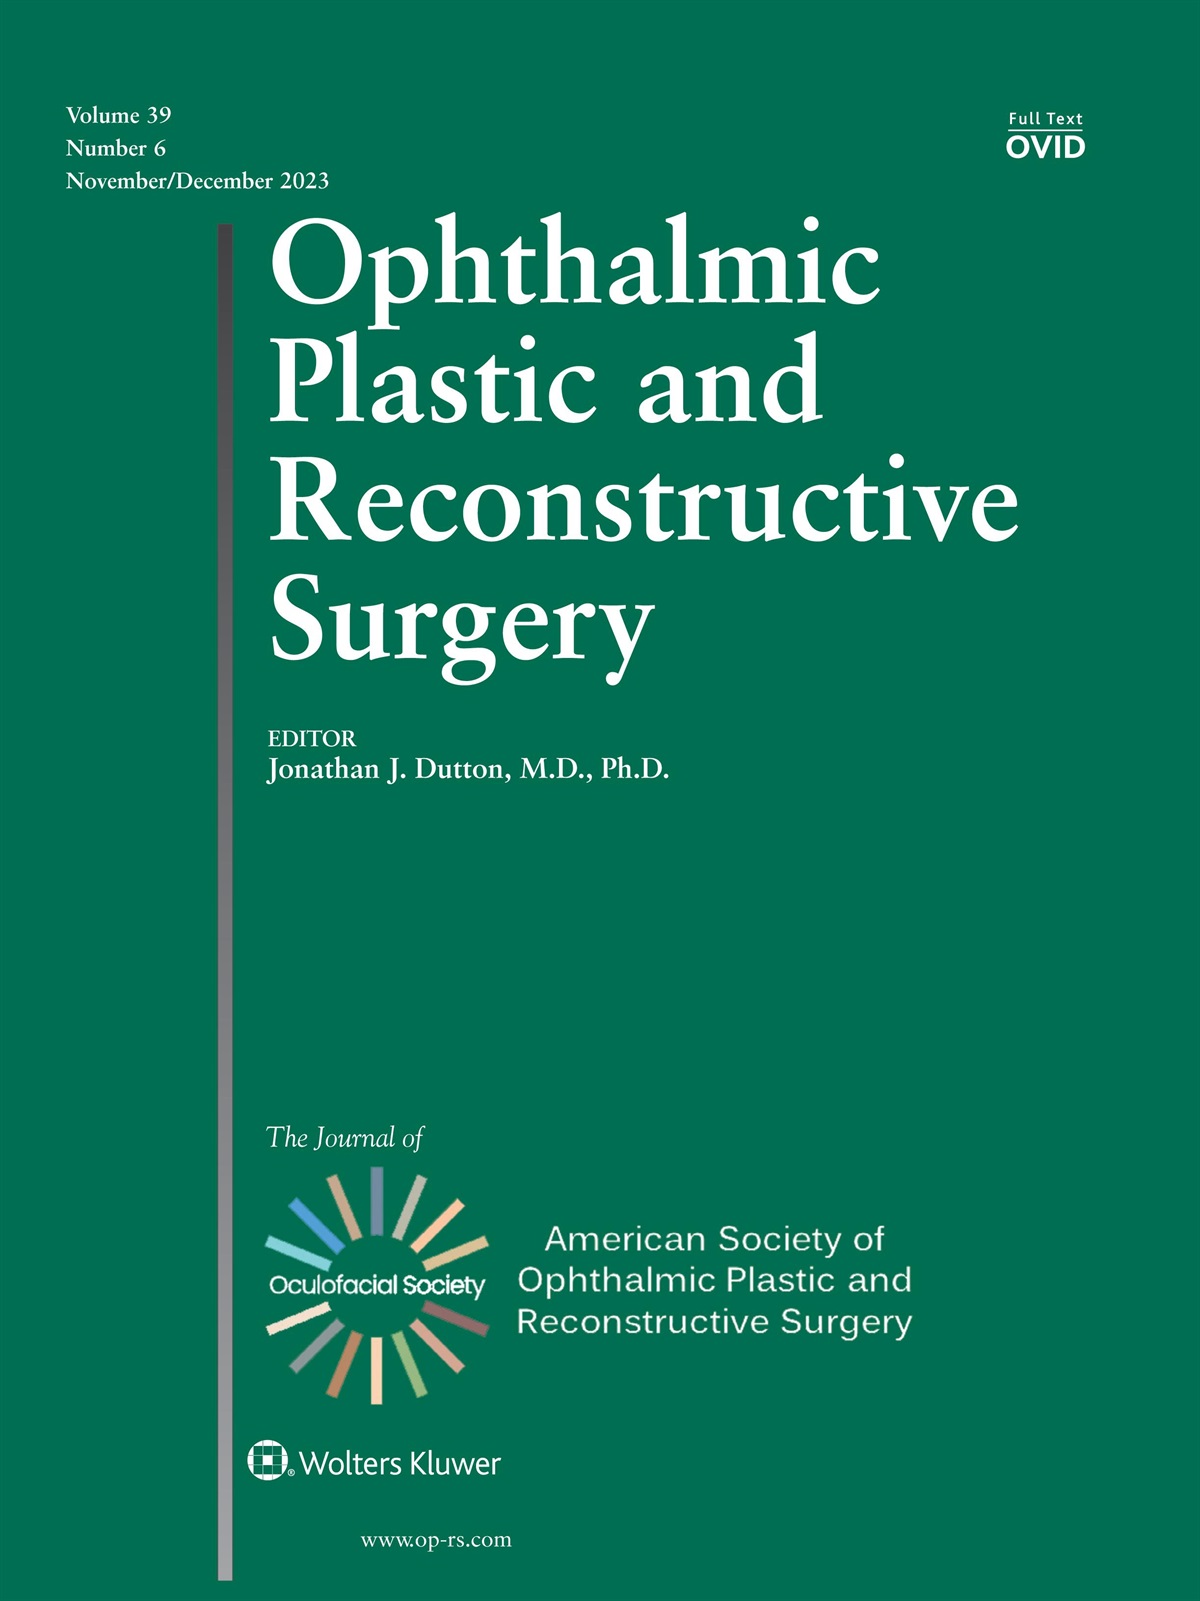 Re: “Effect of Multimodal Preemptive Analgesia of Flurbiprofen Axetil, Nalbuphine, and Retrobulbar Block on Postoperative Pain and Enhanced Recovery in Patients Undergoing Oculoplastic Day Surgery: A Prospective, Randomized, Double-Blinded Study”